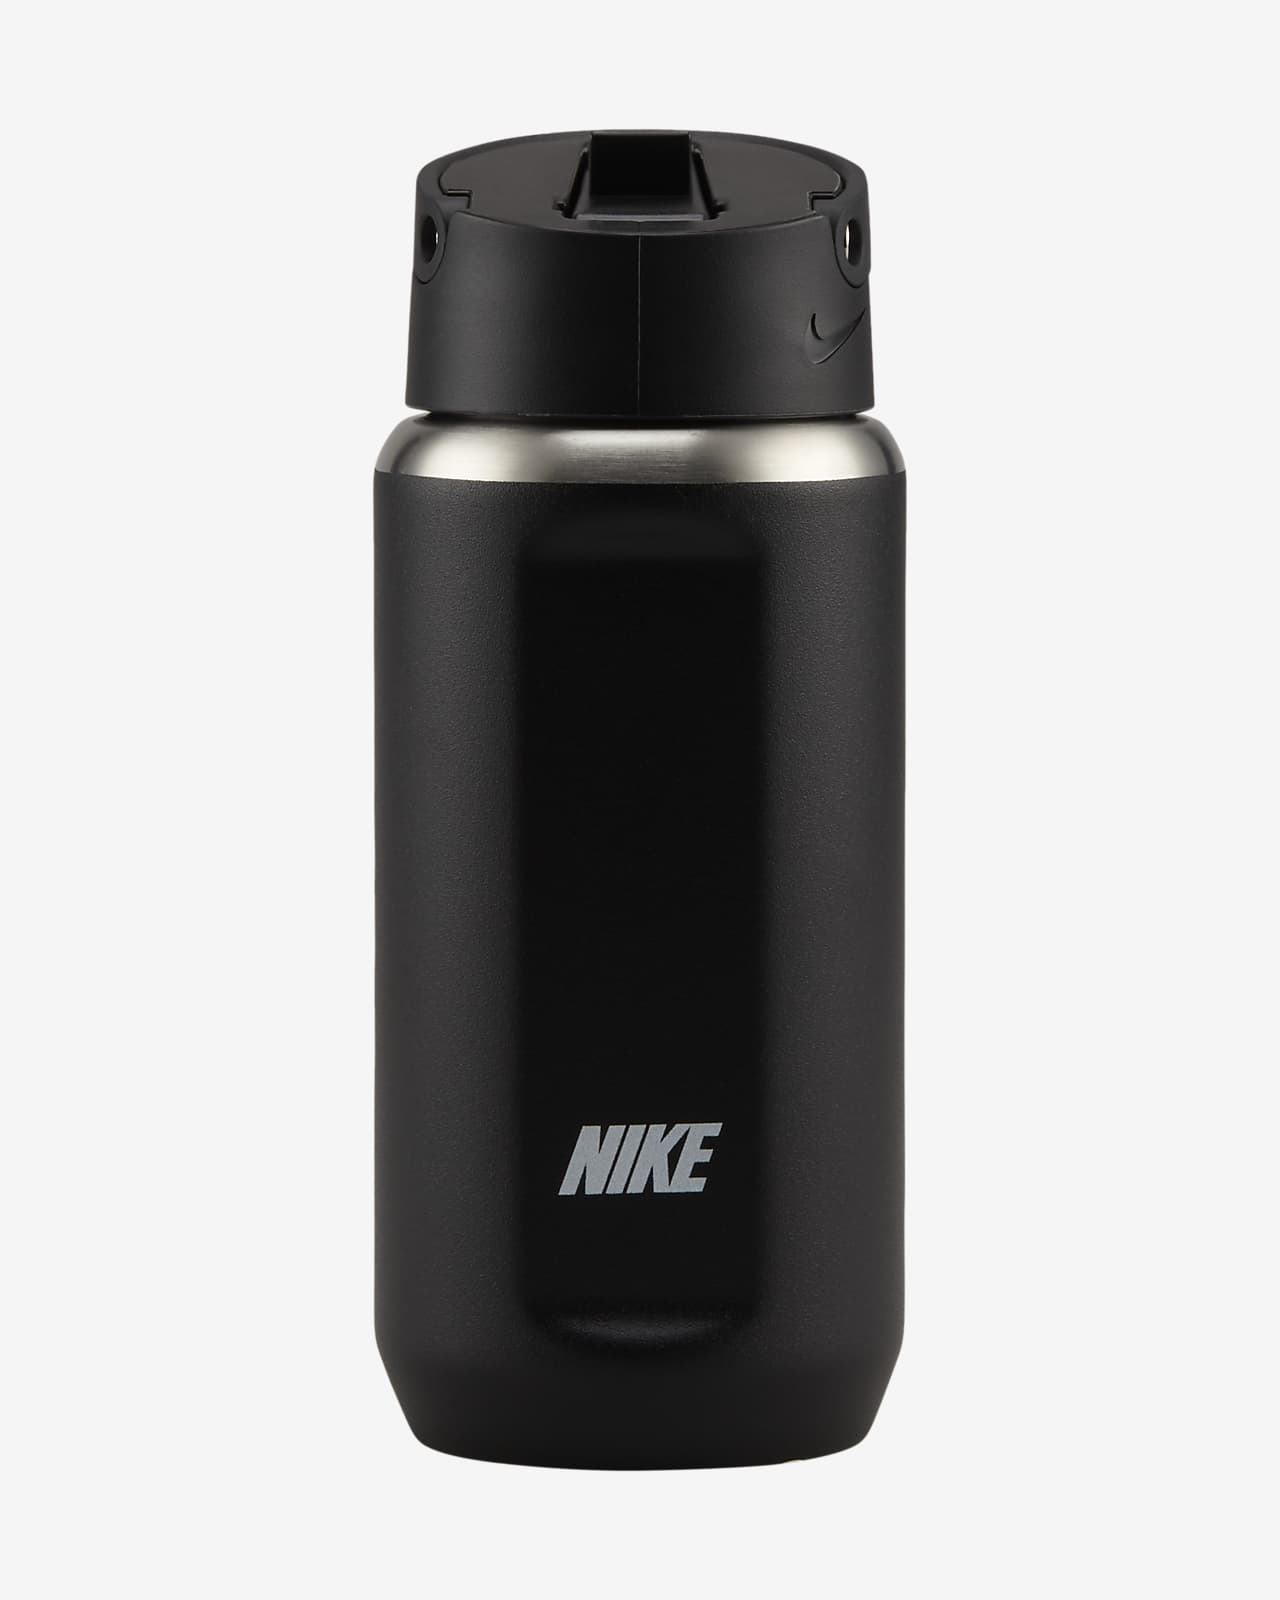 https://static.nike.com/a/images/t_PDP_1280_v1/f_auto,q_auto:eco/0032f340-4d84-4811-9351-ea3f169d374a/recharge-stainless-steel-straw-bottle-12-oz-3lTqVw.png